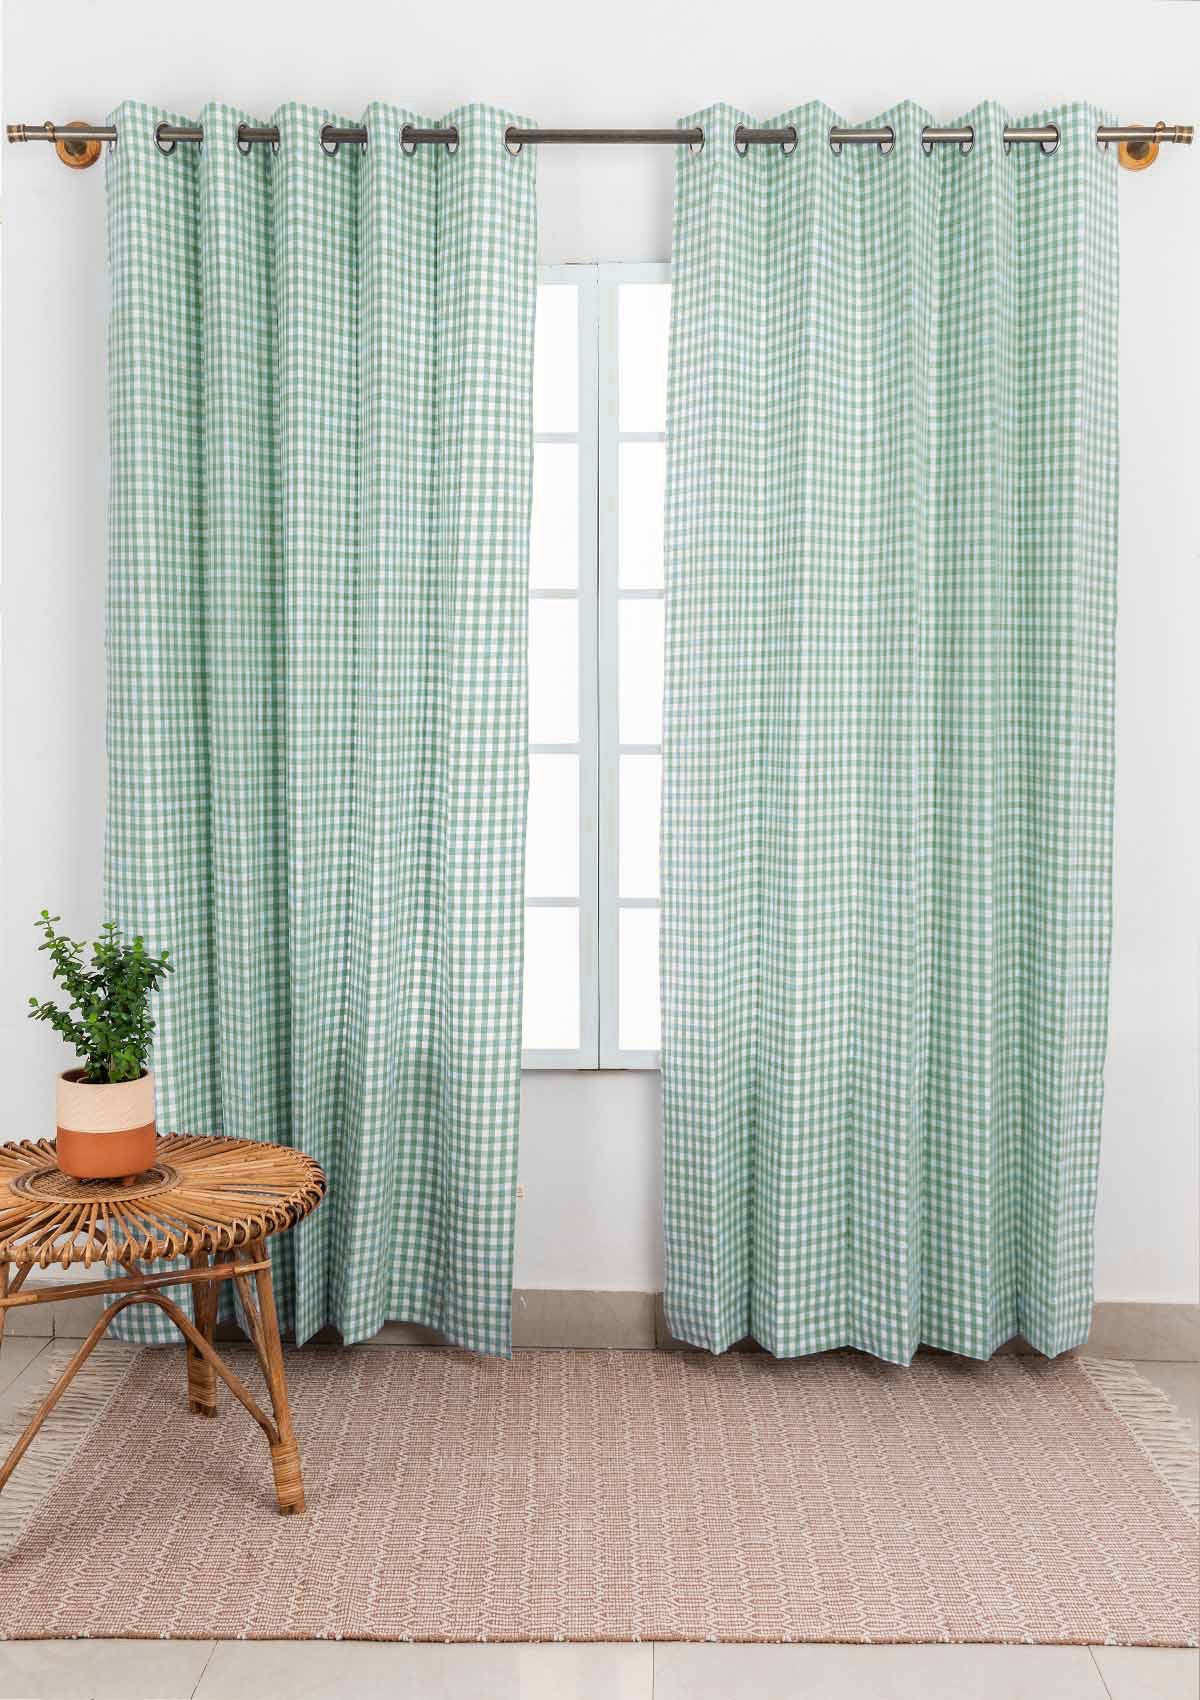 Gingham Woven 100% Customizable cotton geometric curtain for living room - Room darkening - Sage Green - Pack of 1